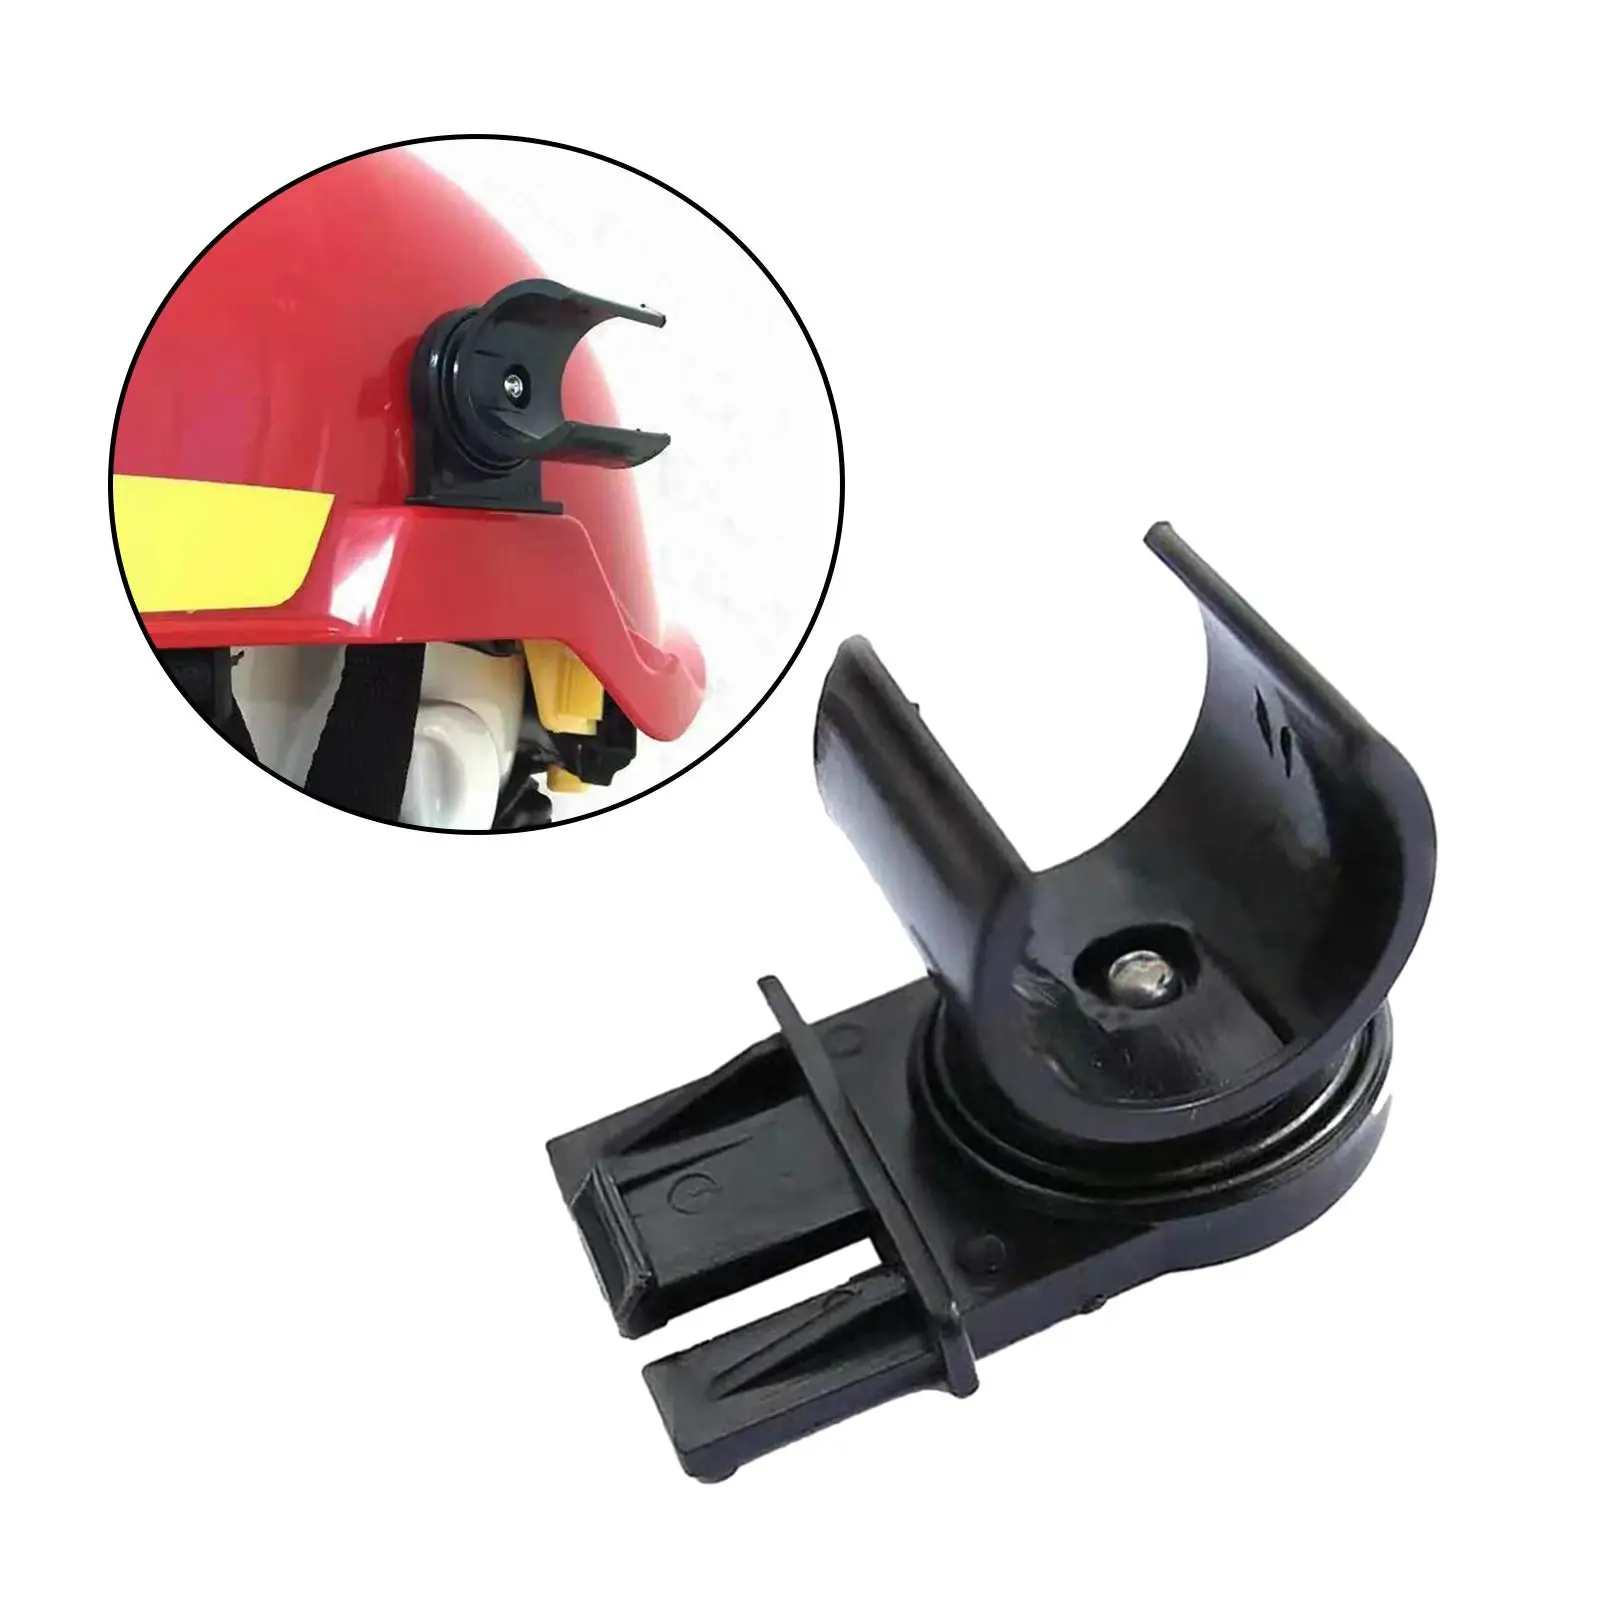 Hard Hats Flashlight Holder Easily Mount Mounting Bracket Lightweight Helmet Clips for Headlamp for Outdoor Cycling Outdoor Work